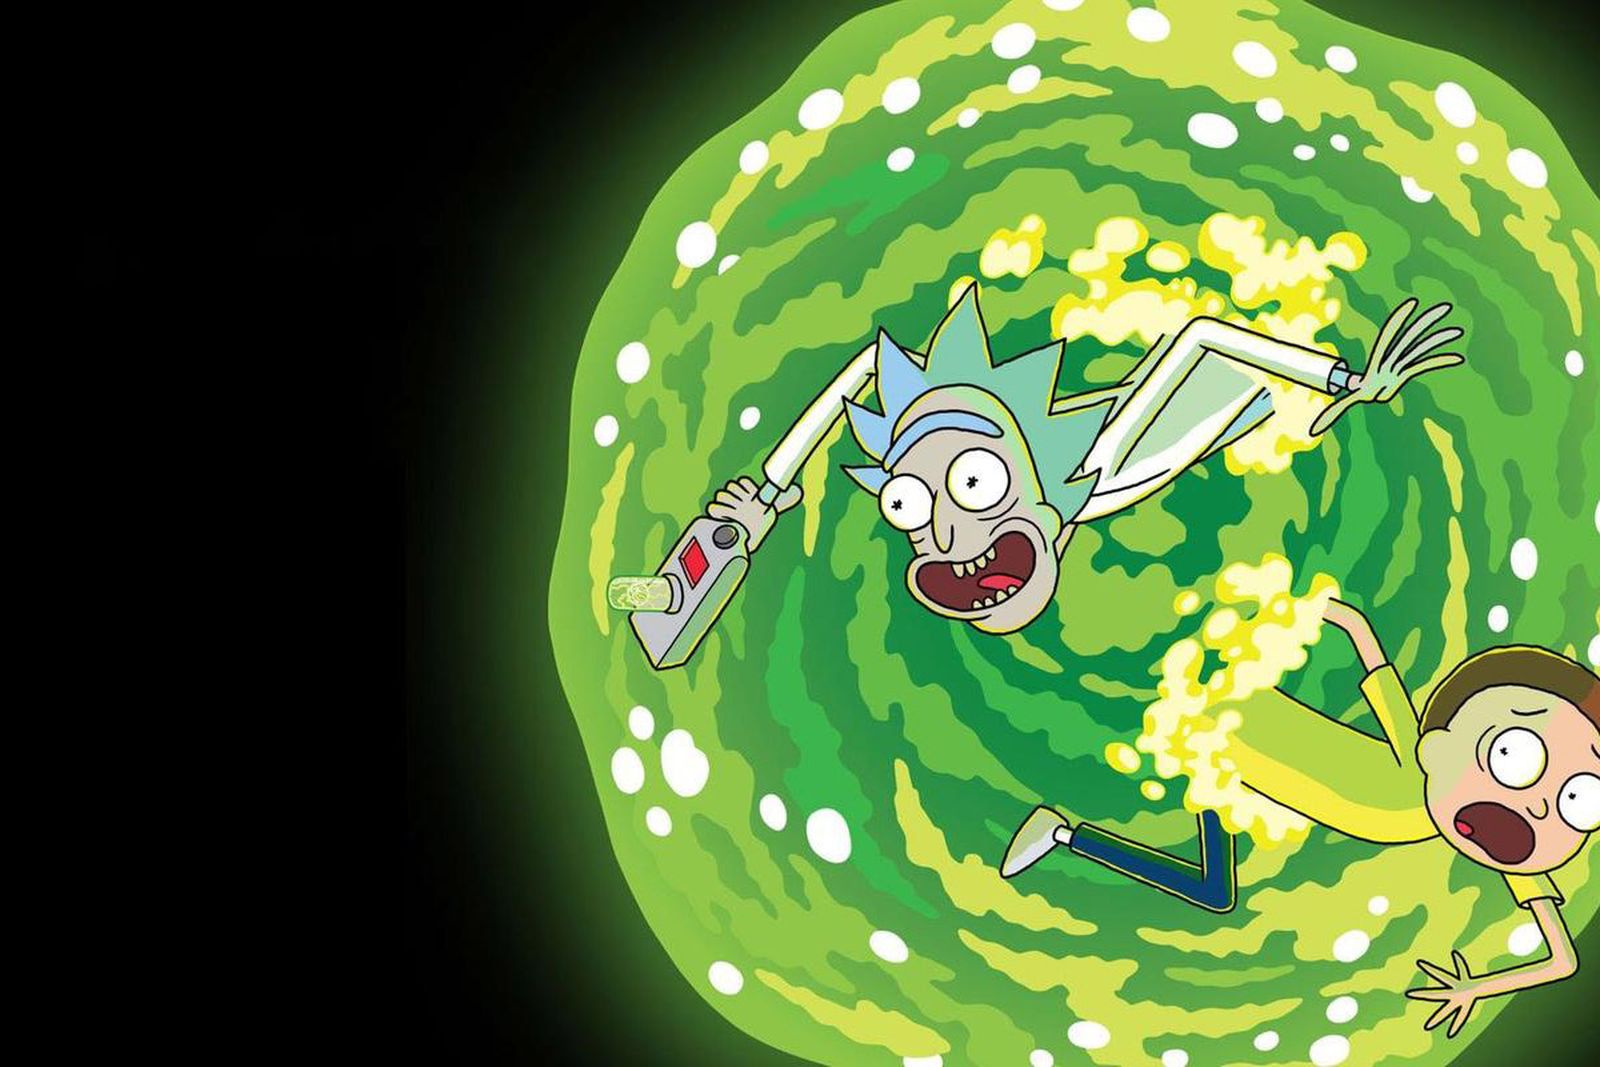 rick-and-morty-season-4-release-date-01